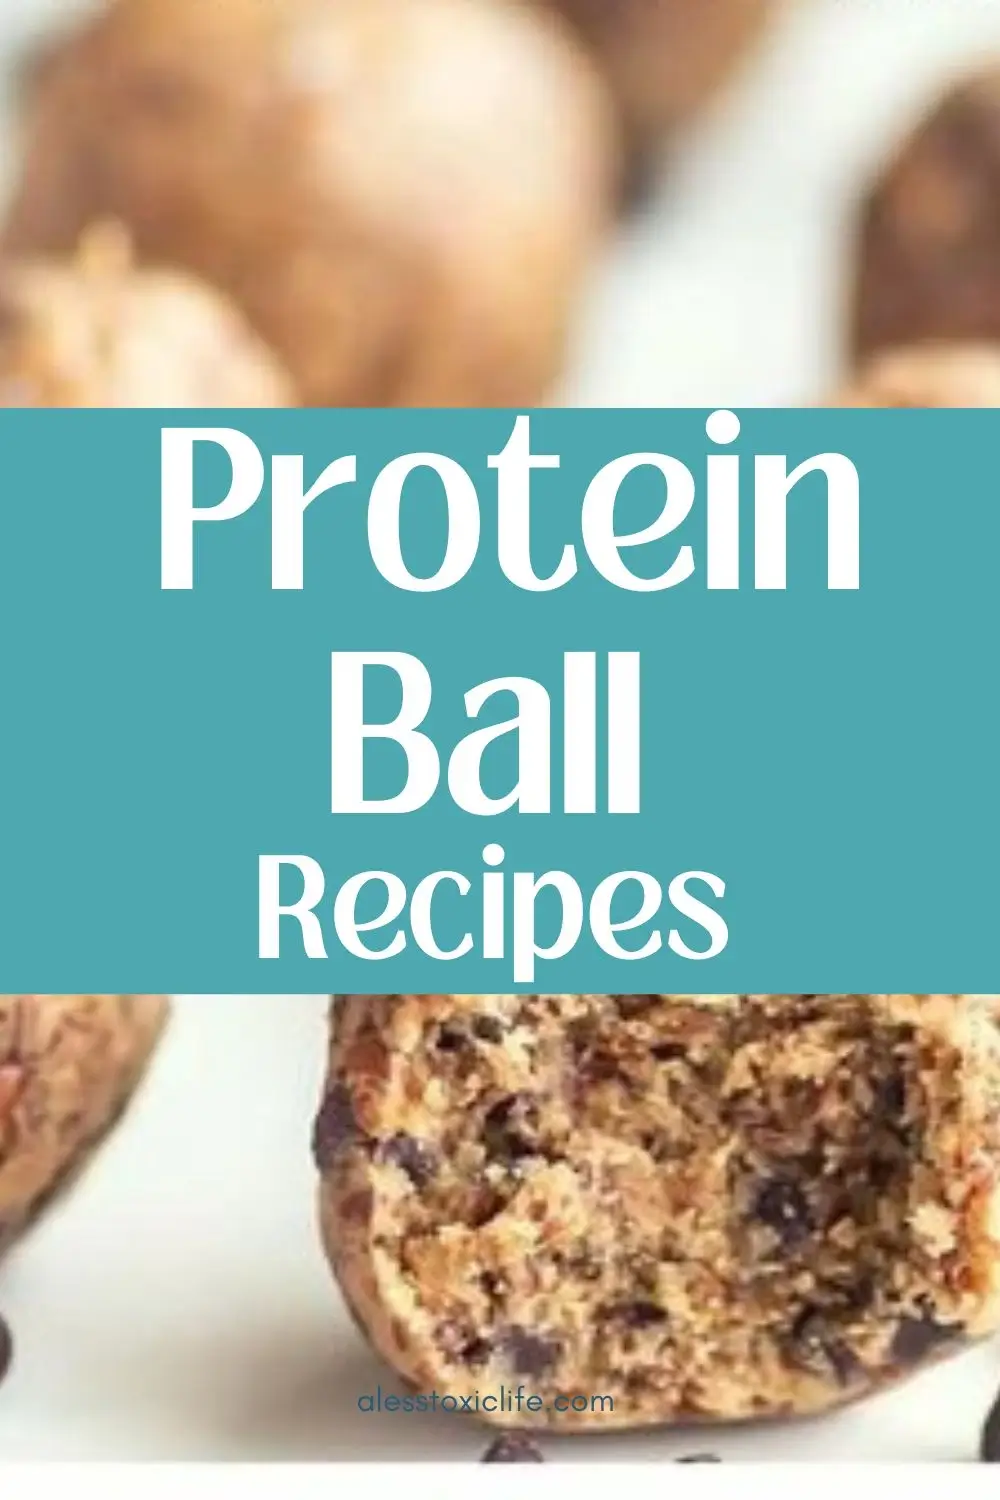 Protein ball recipes